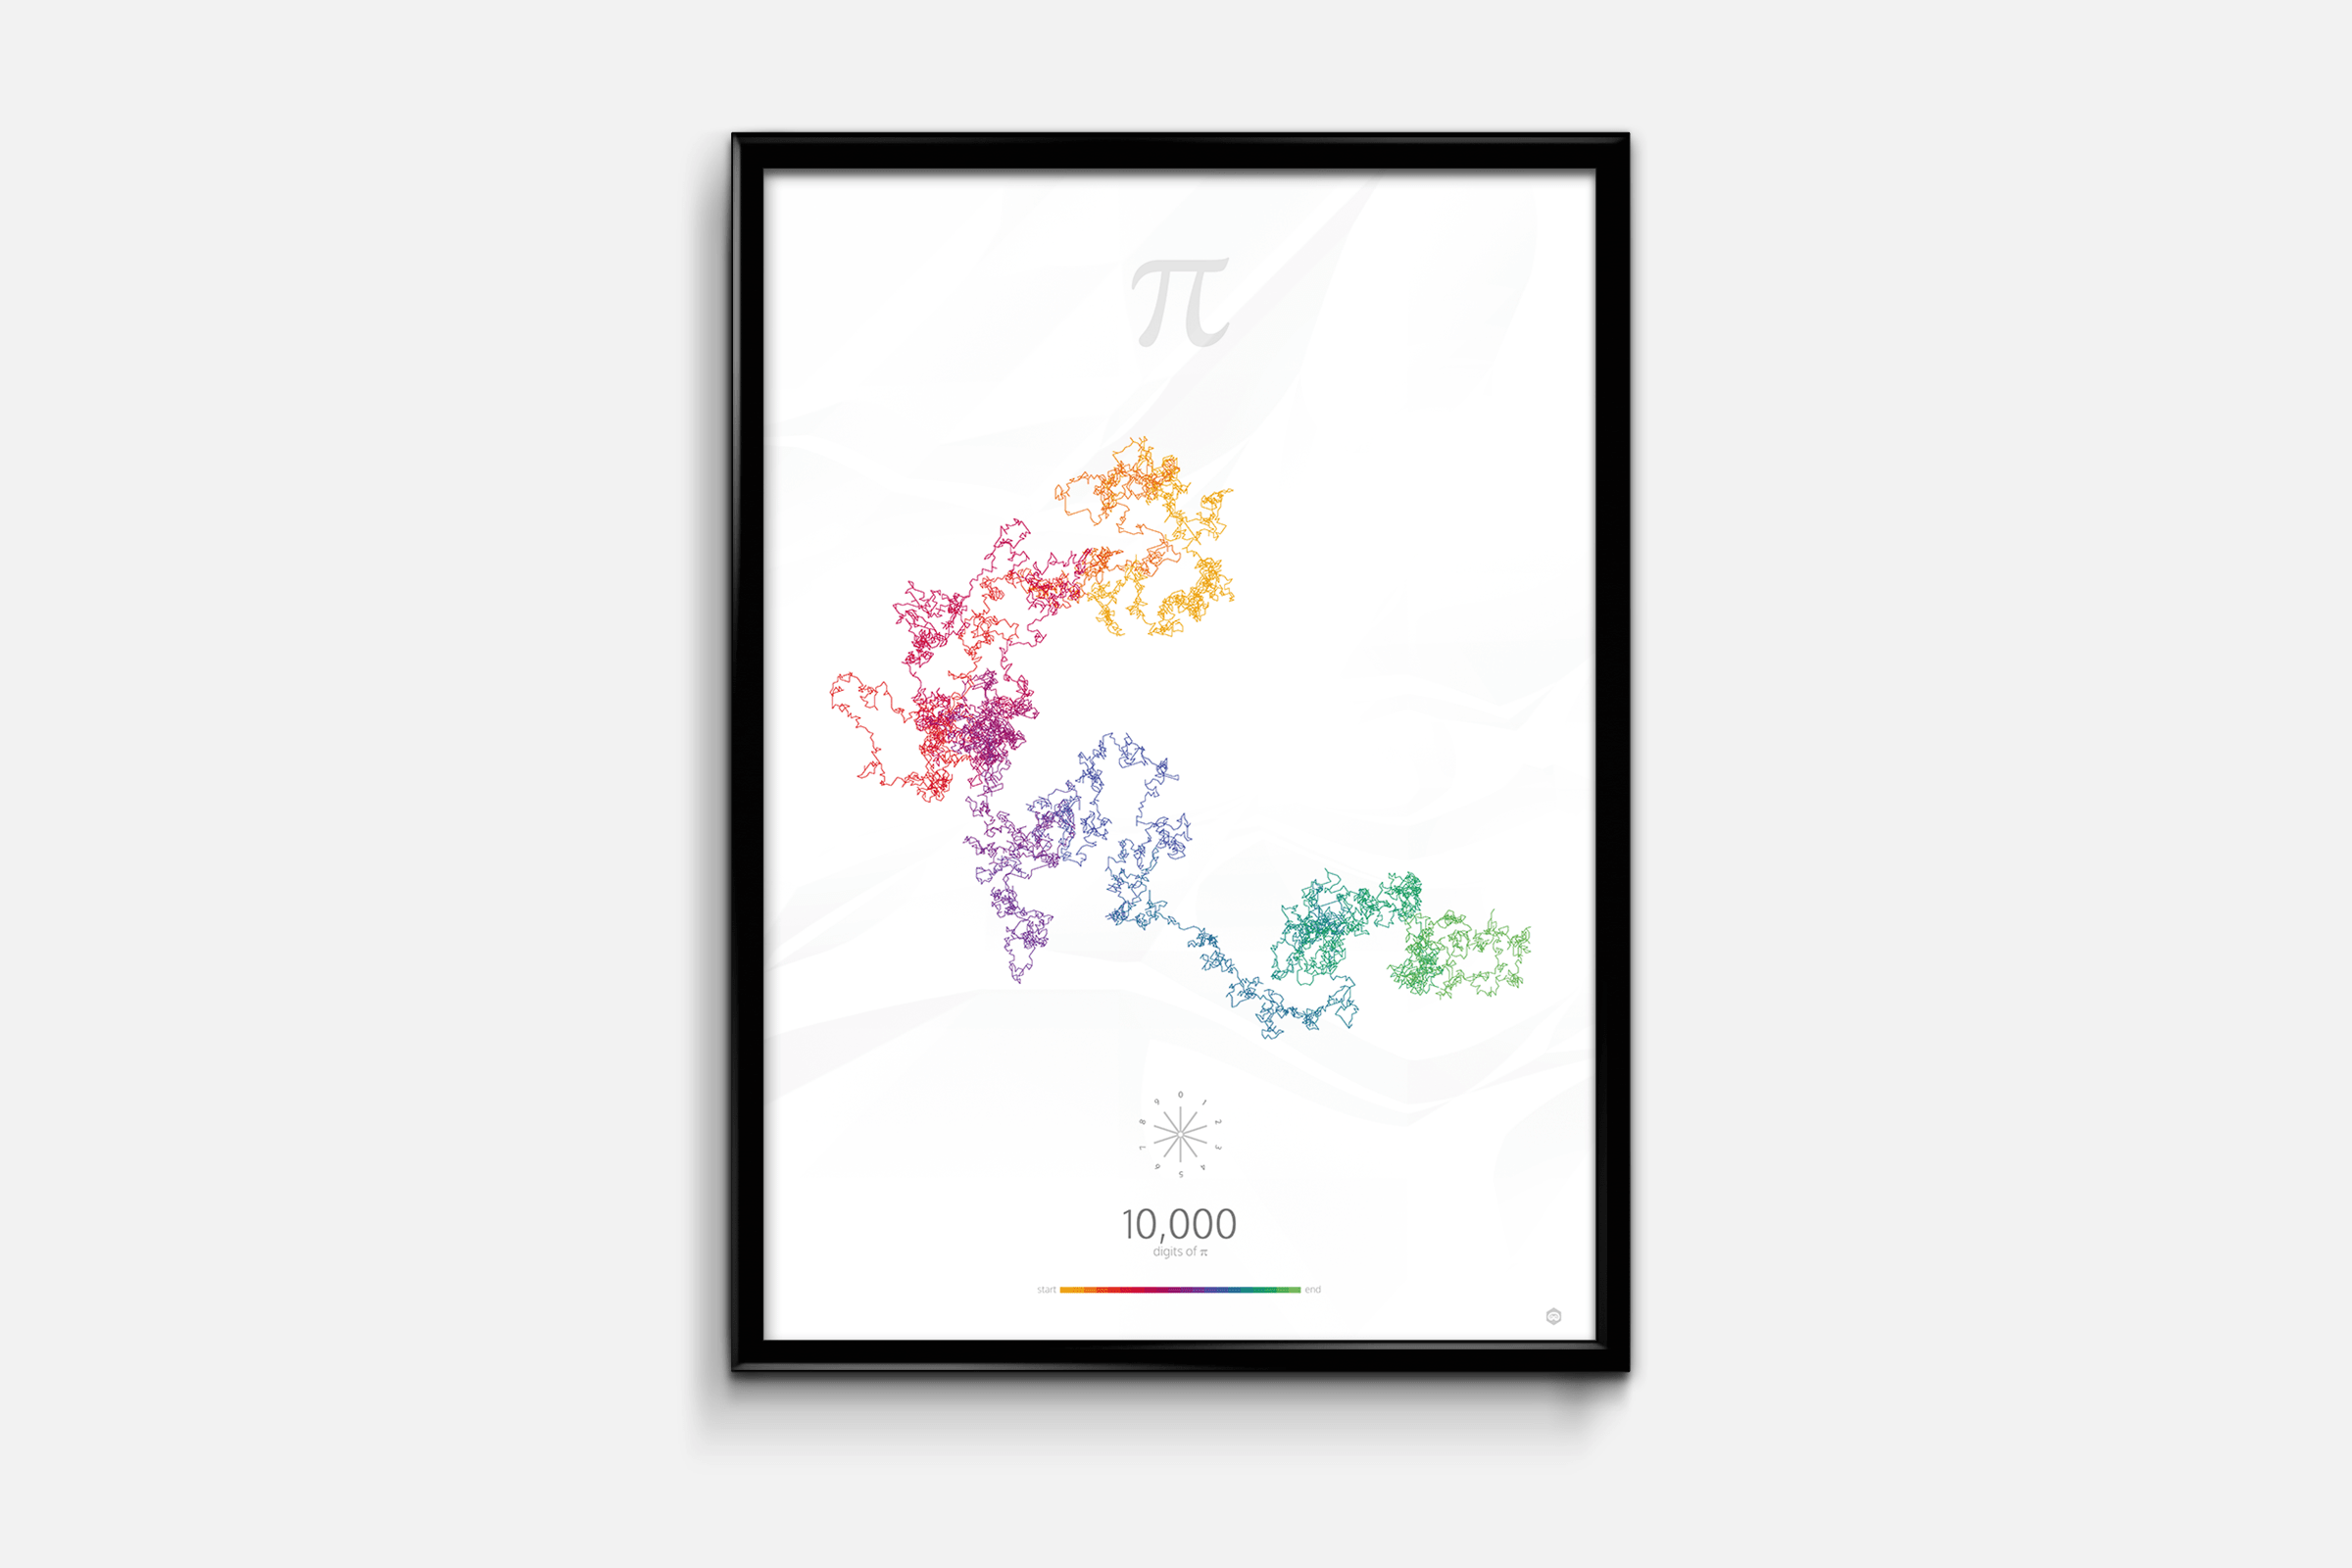 The poster of the first 1000 digits of pi